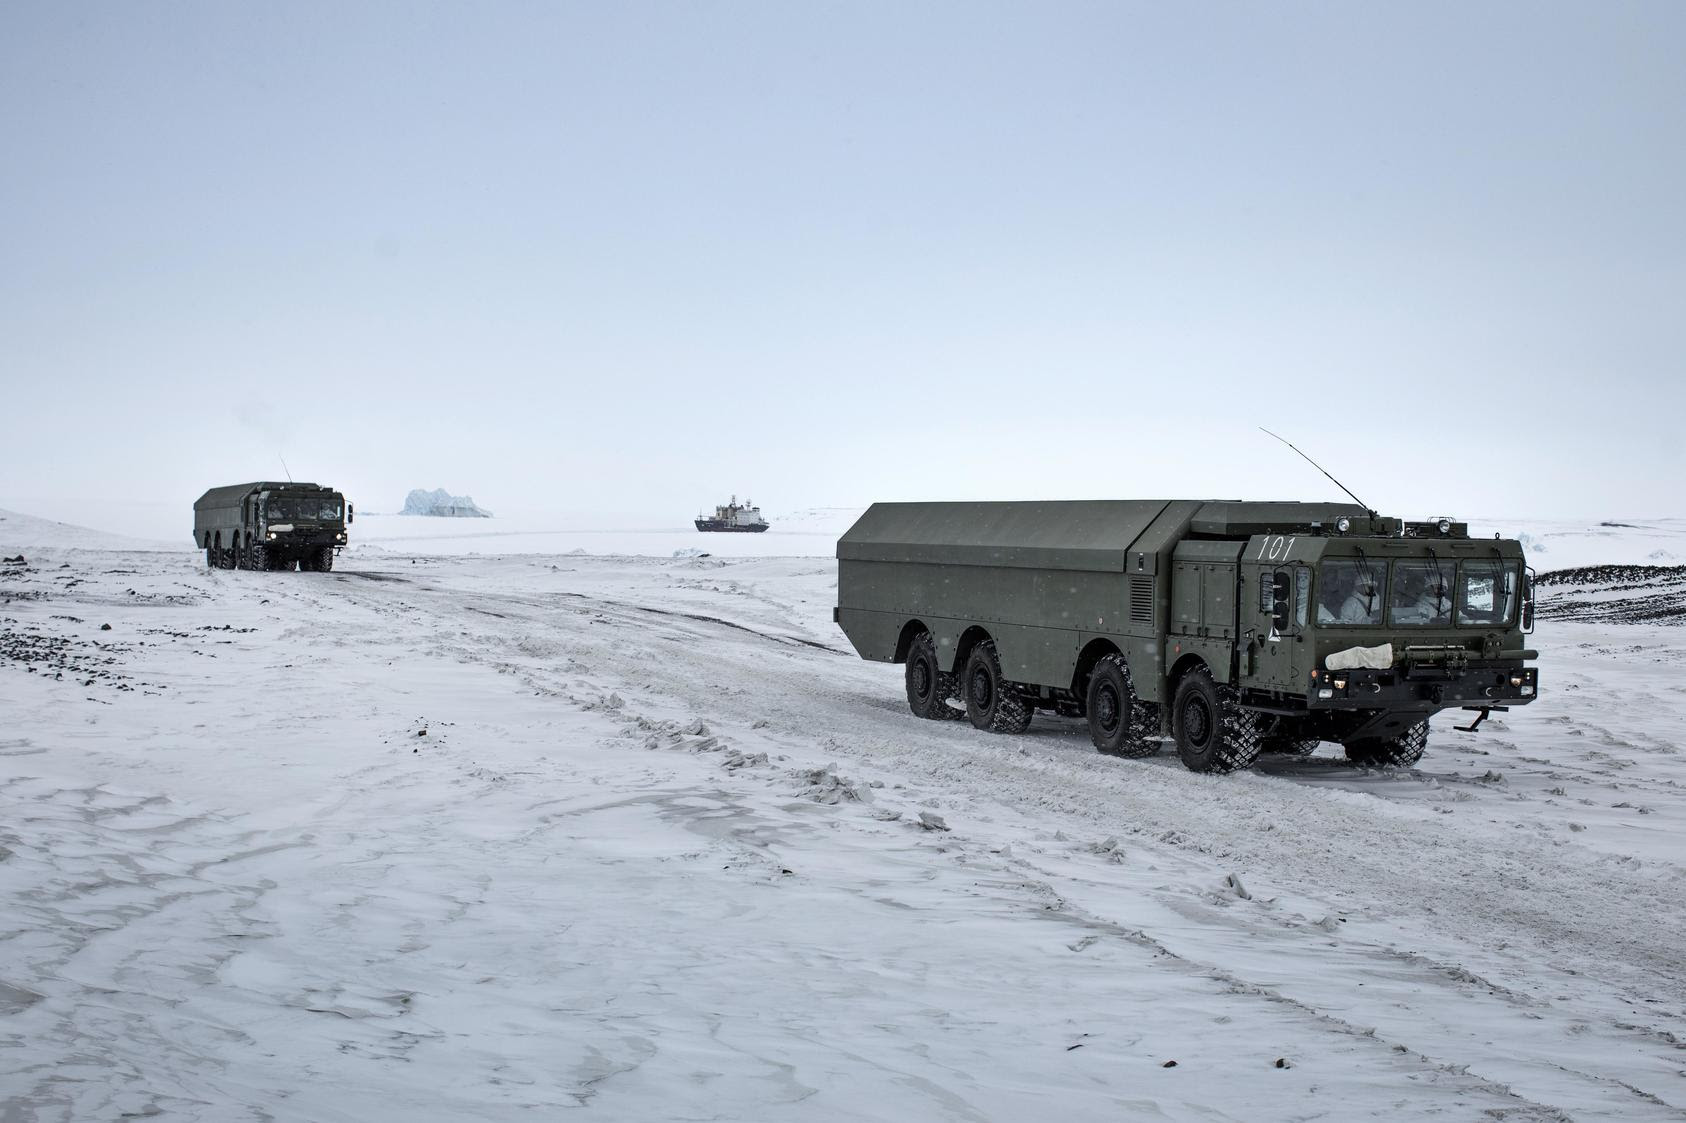 Russia’s military moves mobile missile launchers in its Arctic region in 2021. The government of President Vladimir Putin has asserted a right to use nuclear weapons in the Ukraine war. (Emile Ducke/The New York Times)